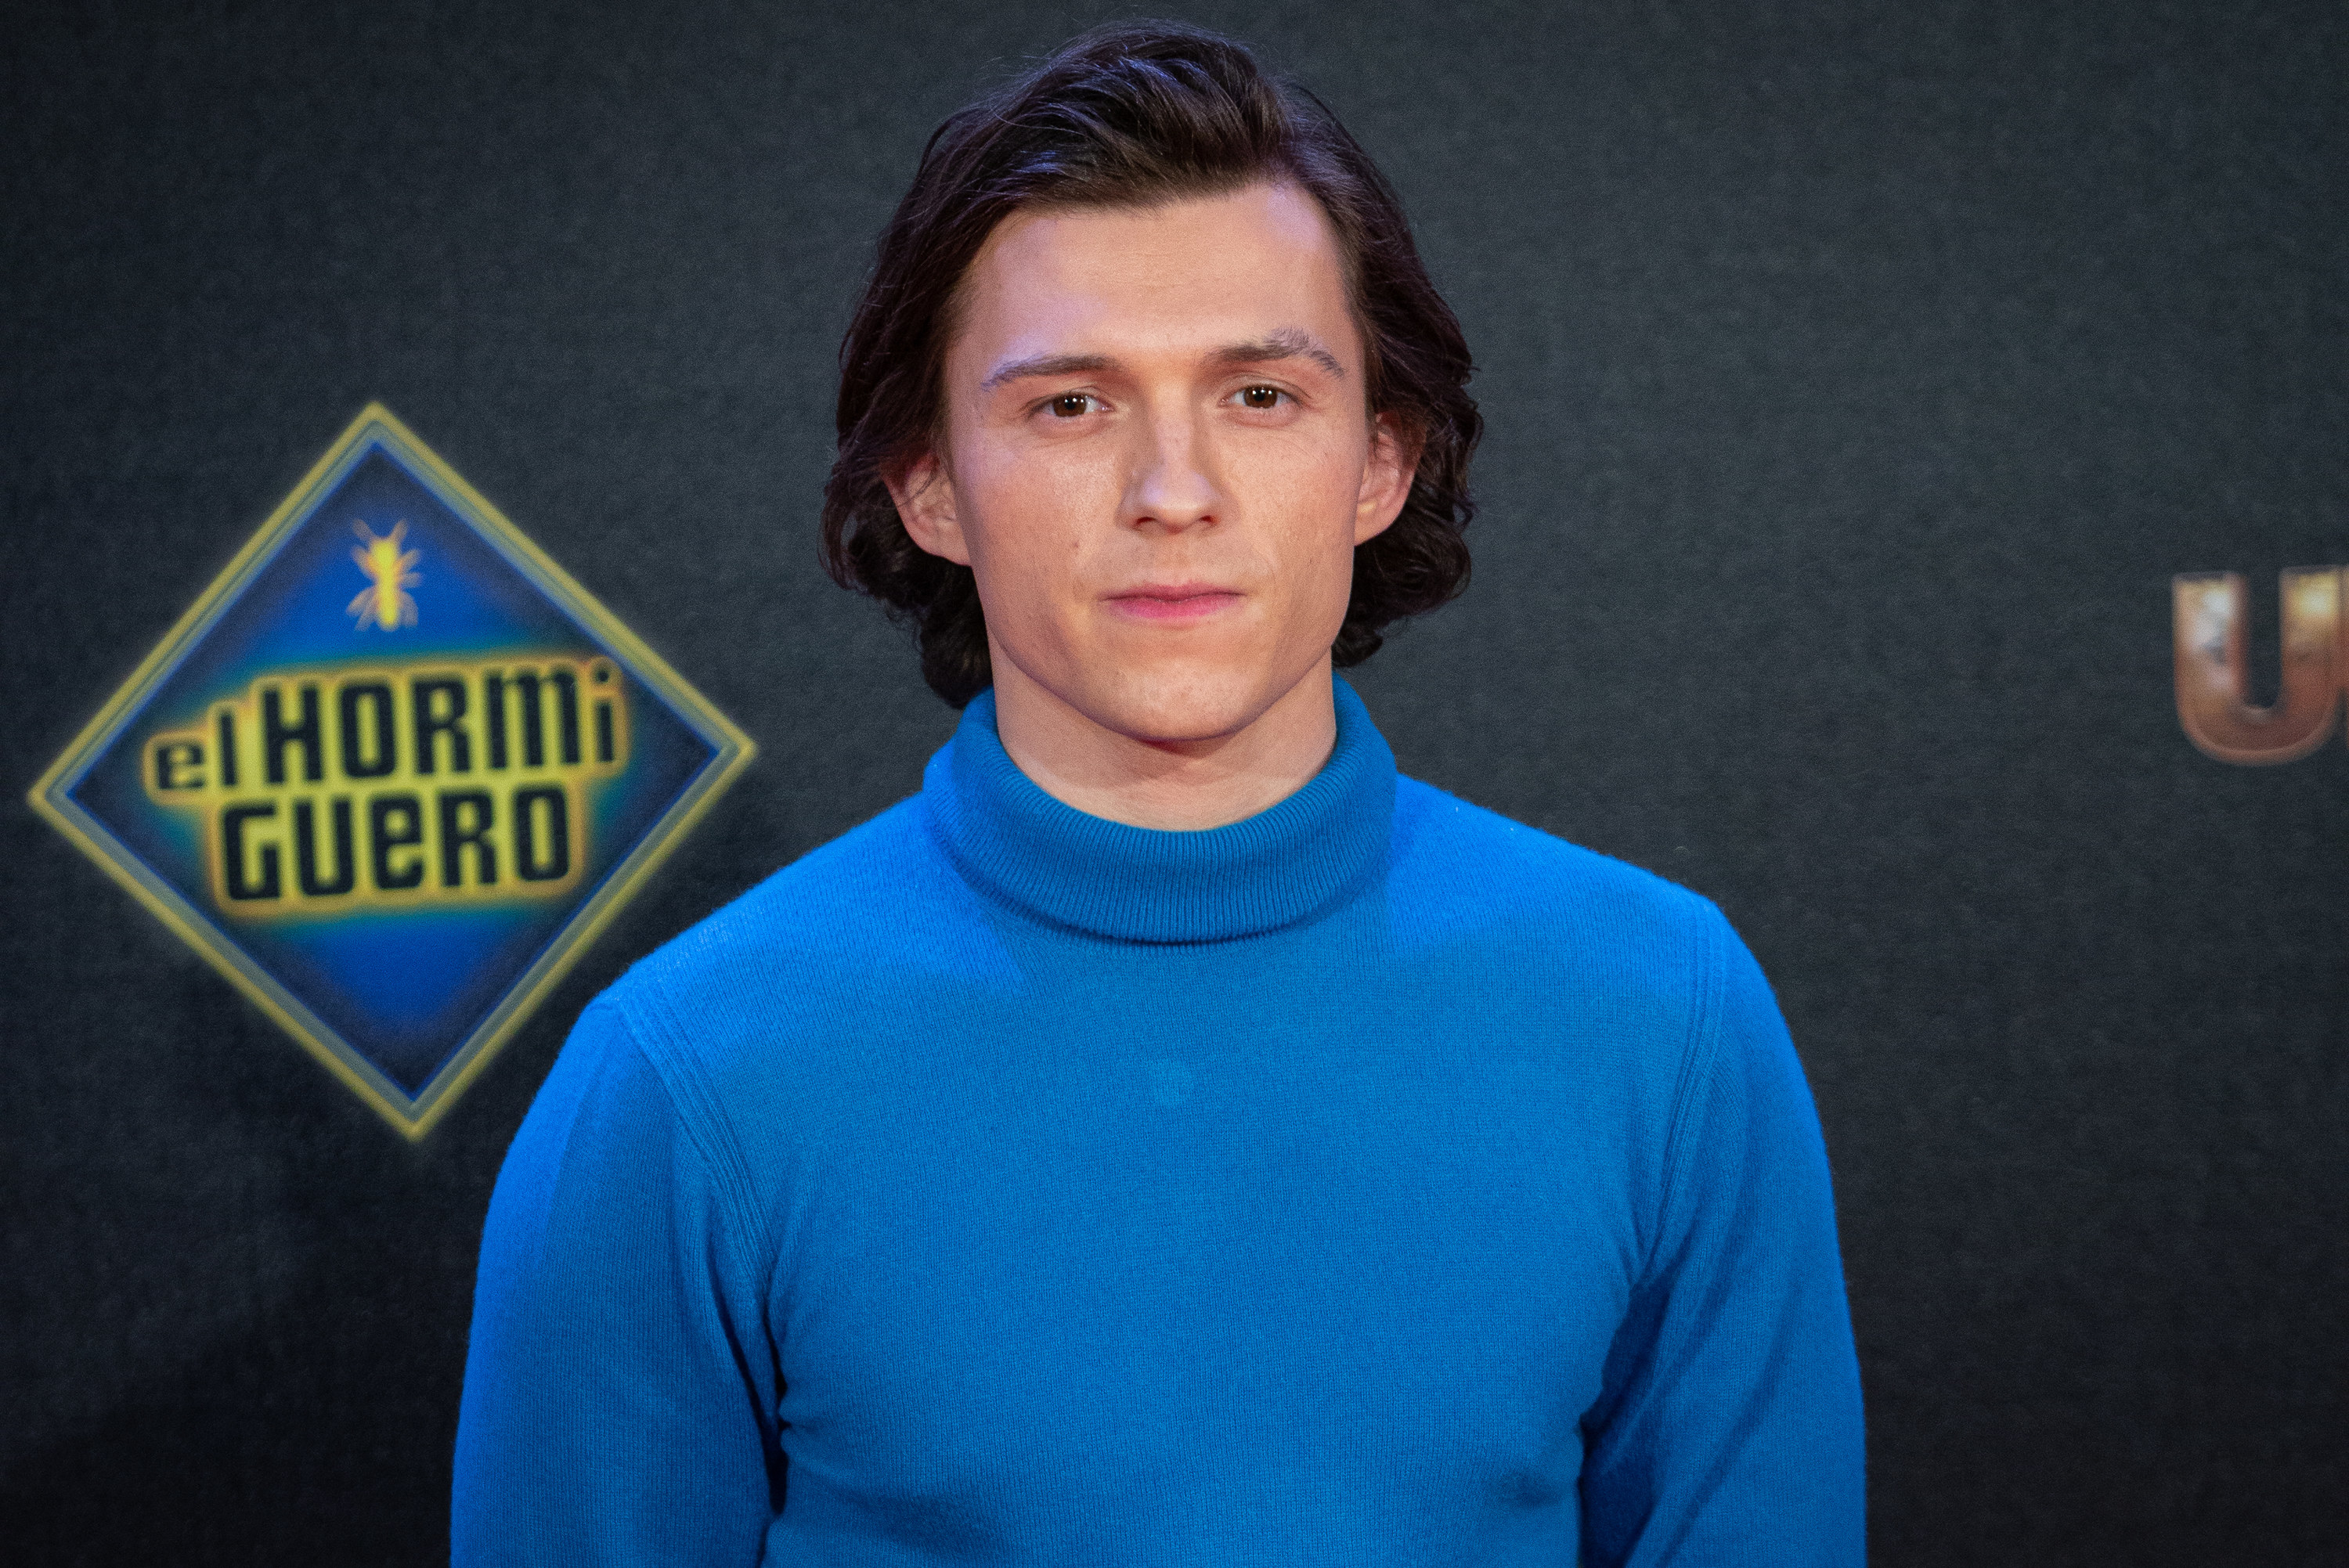 Tom poses for a picture while wearing a turtleneck